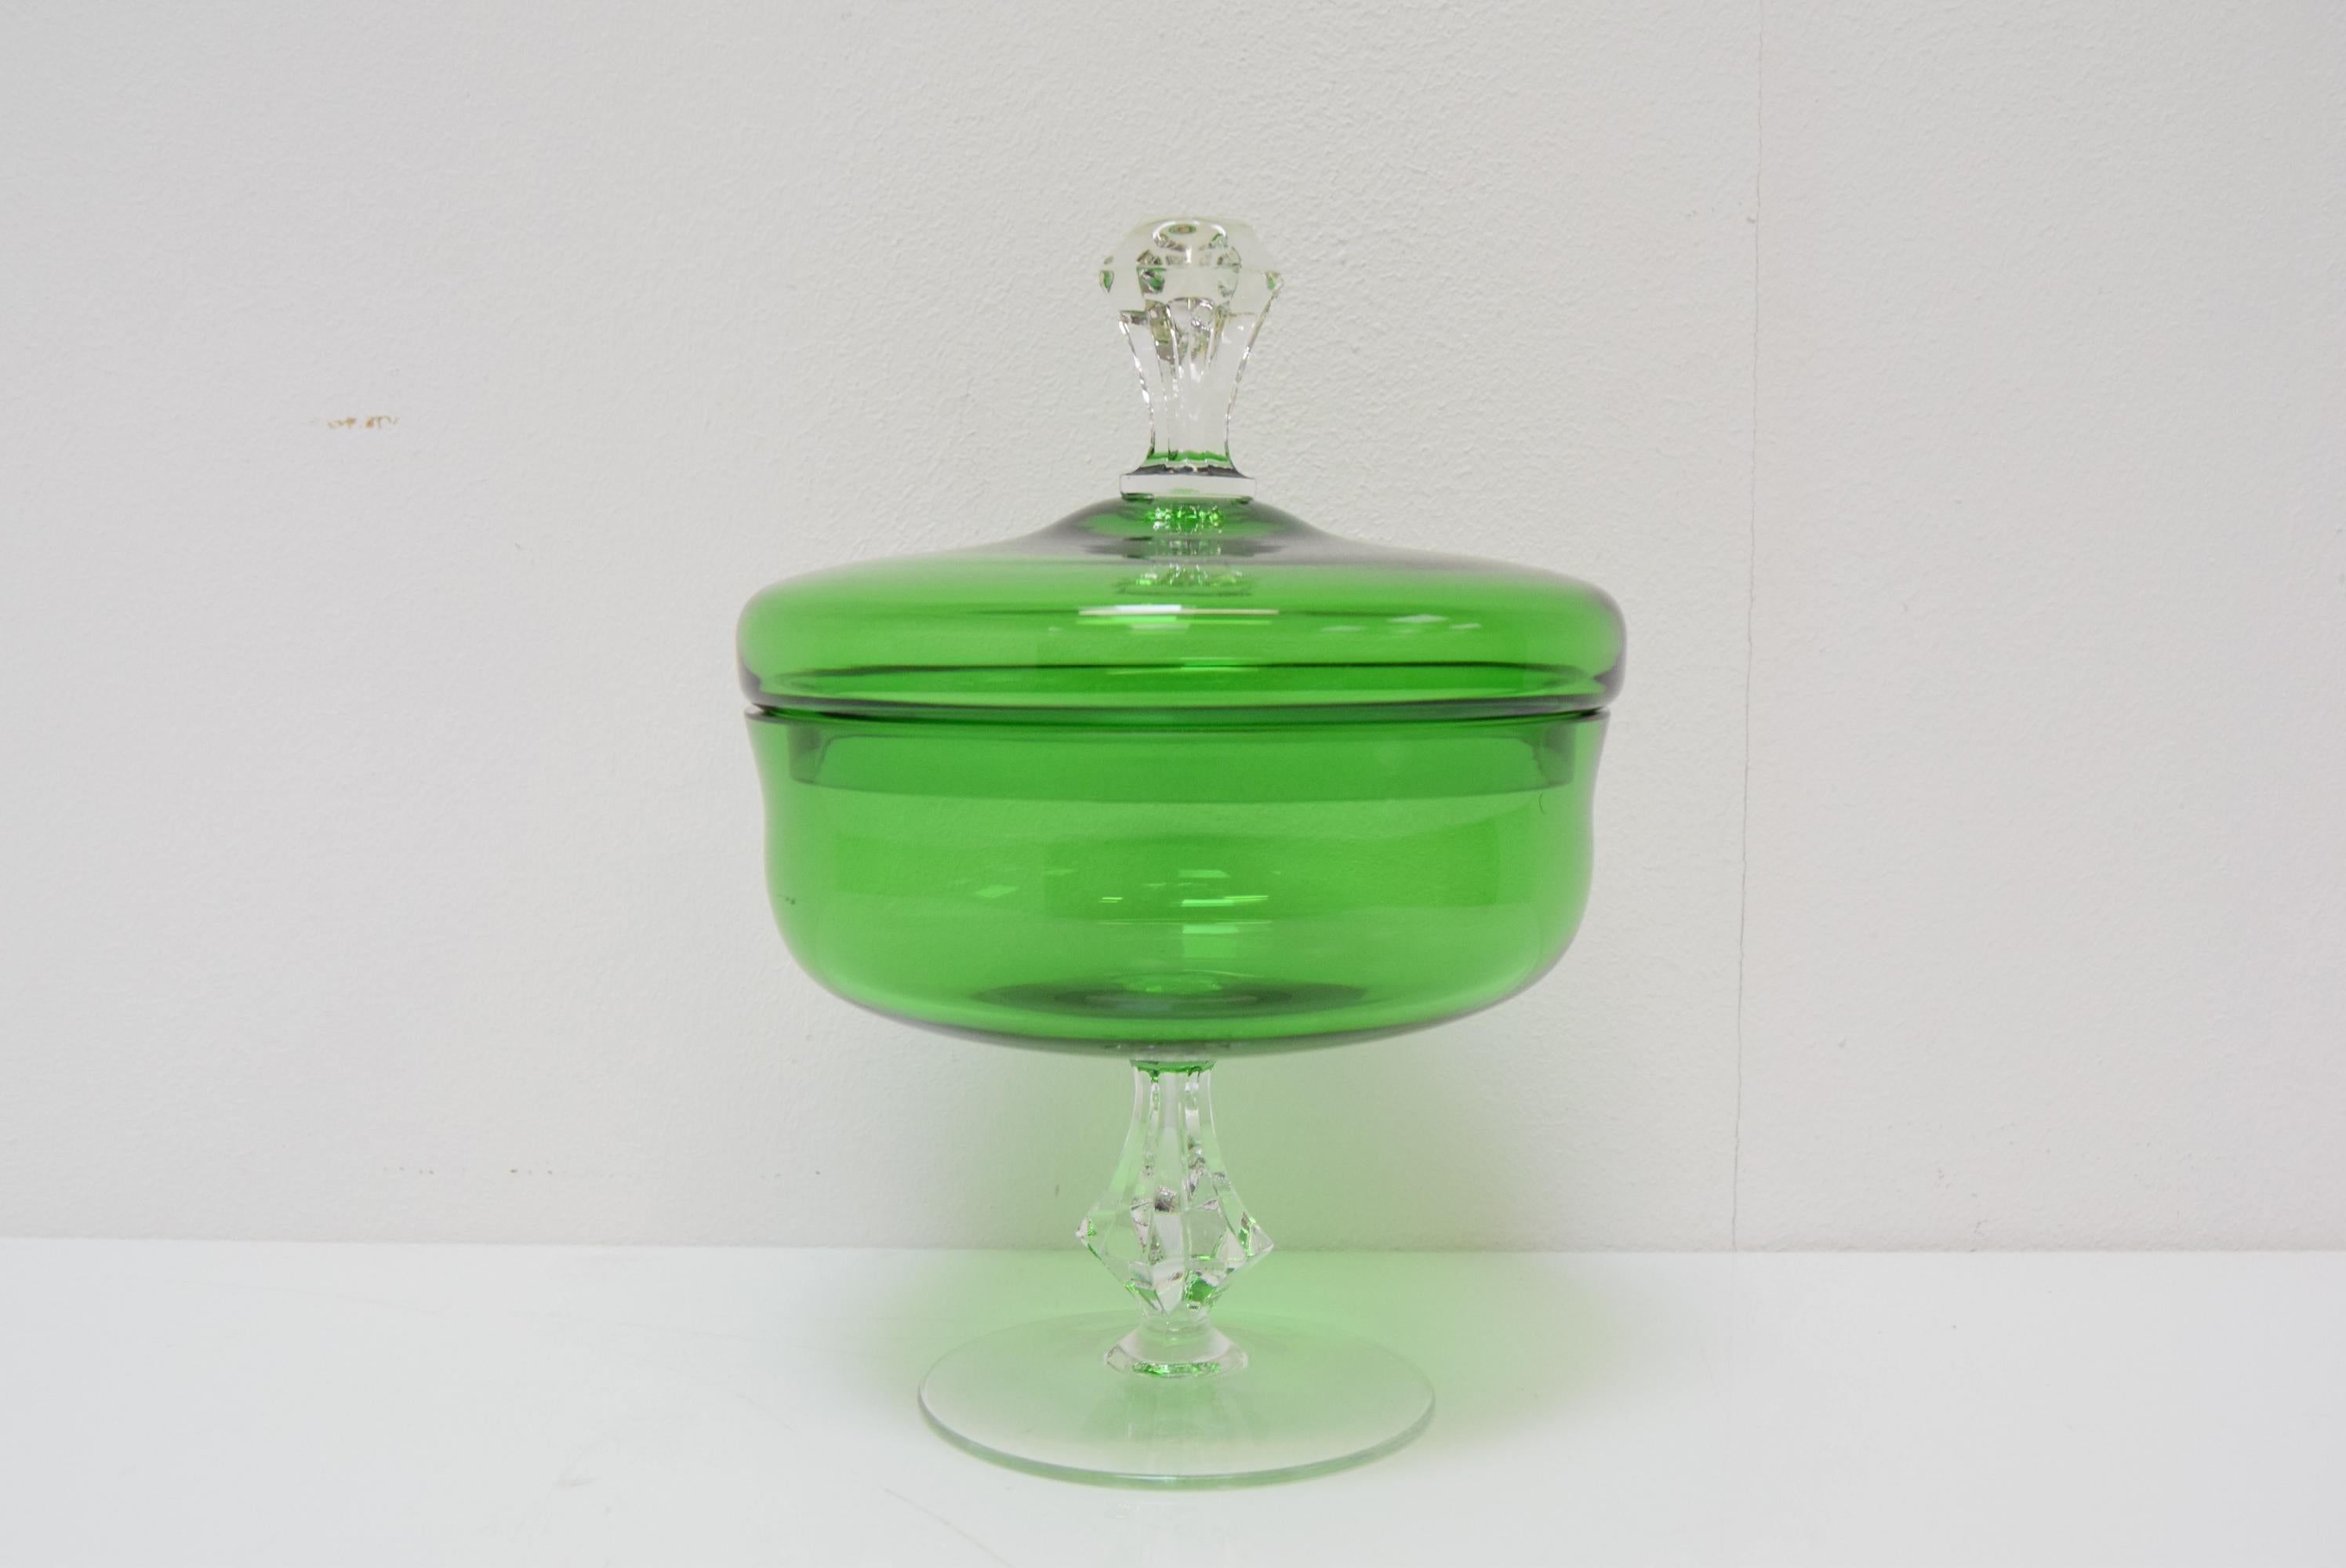 Made in Czechoslovakia
Made of Art Glass
Re-polished
Good Original condition.